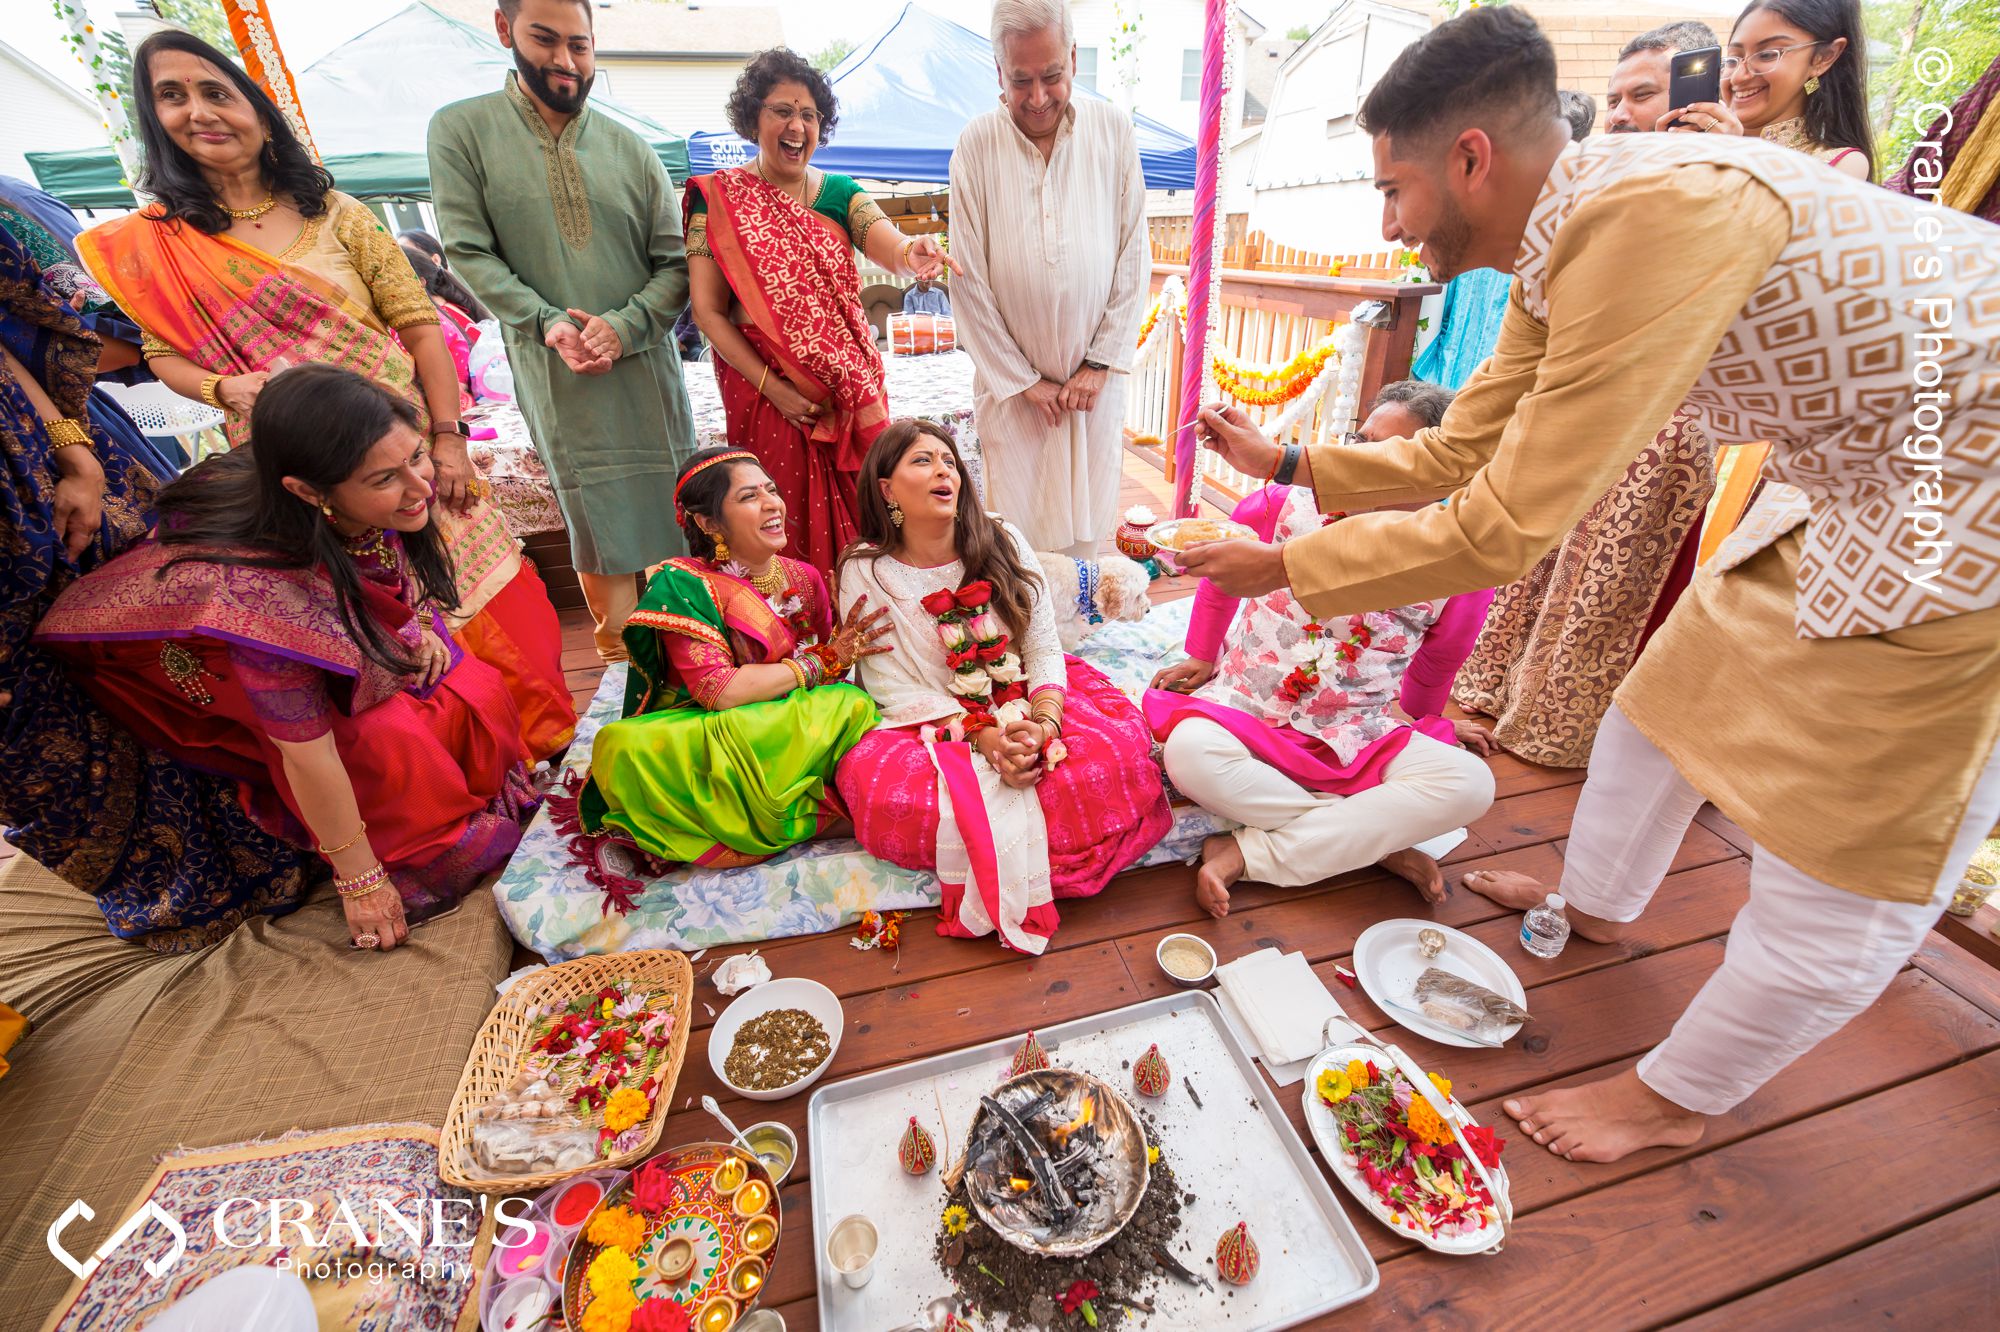 A candid moment during the pre-wedding GANESH PUJA Hindu ceremony